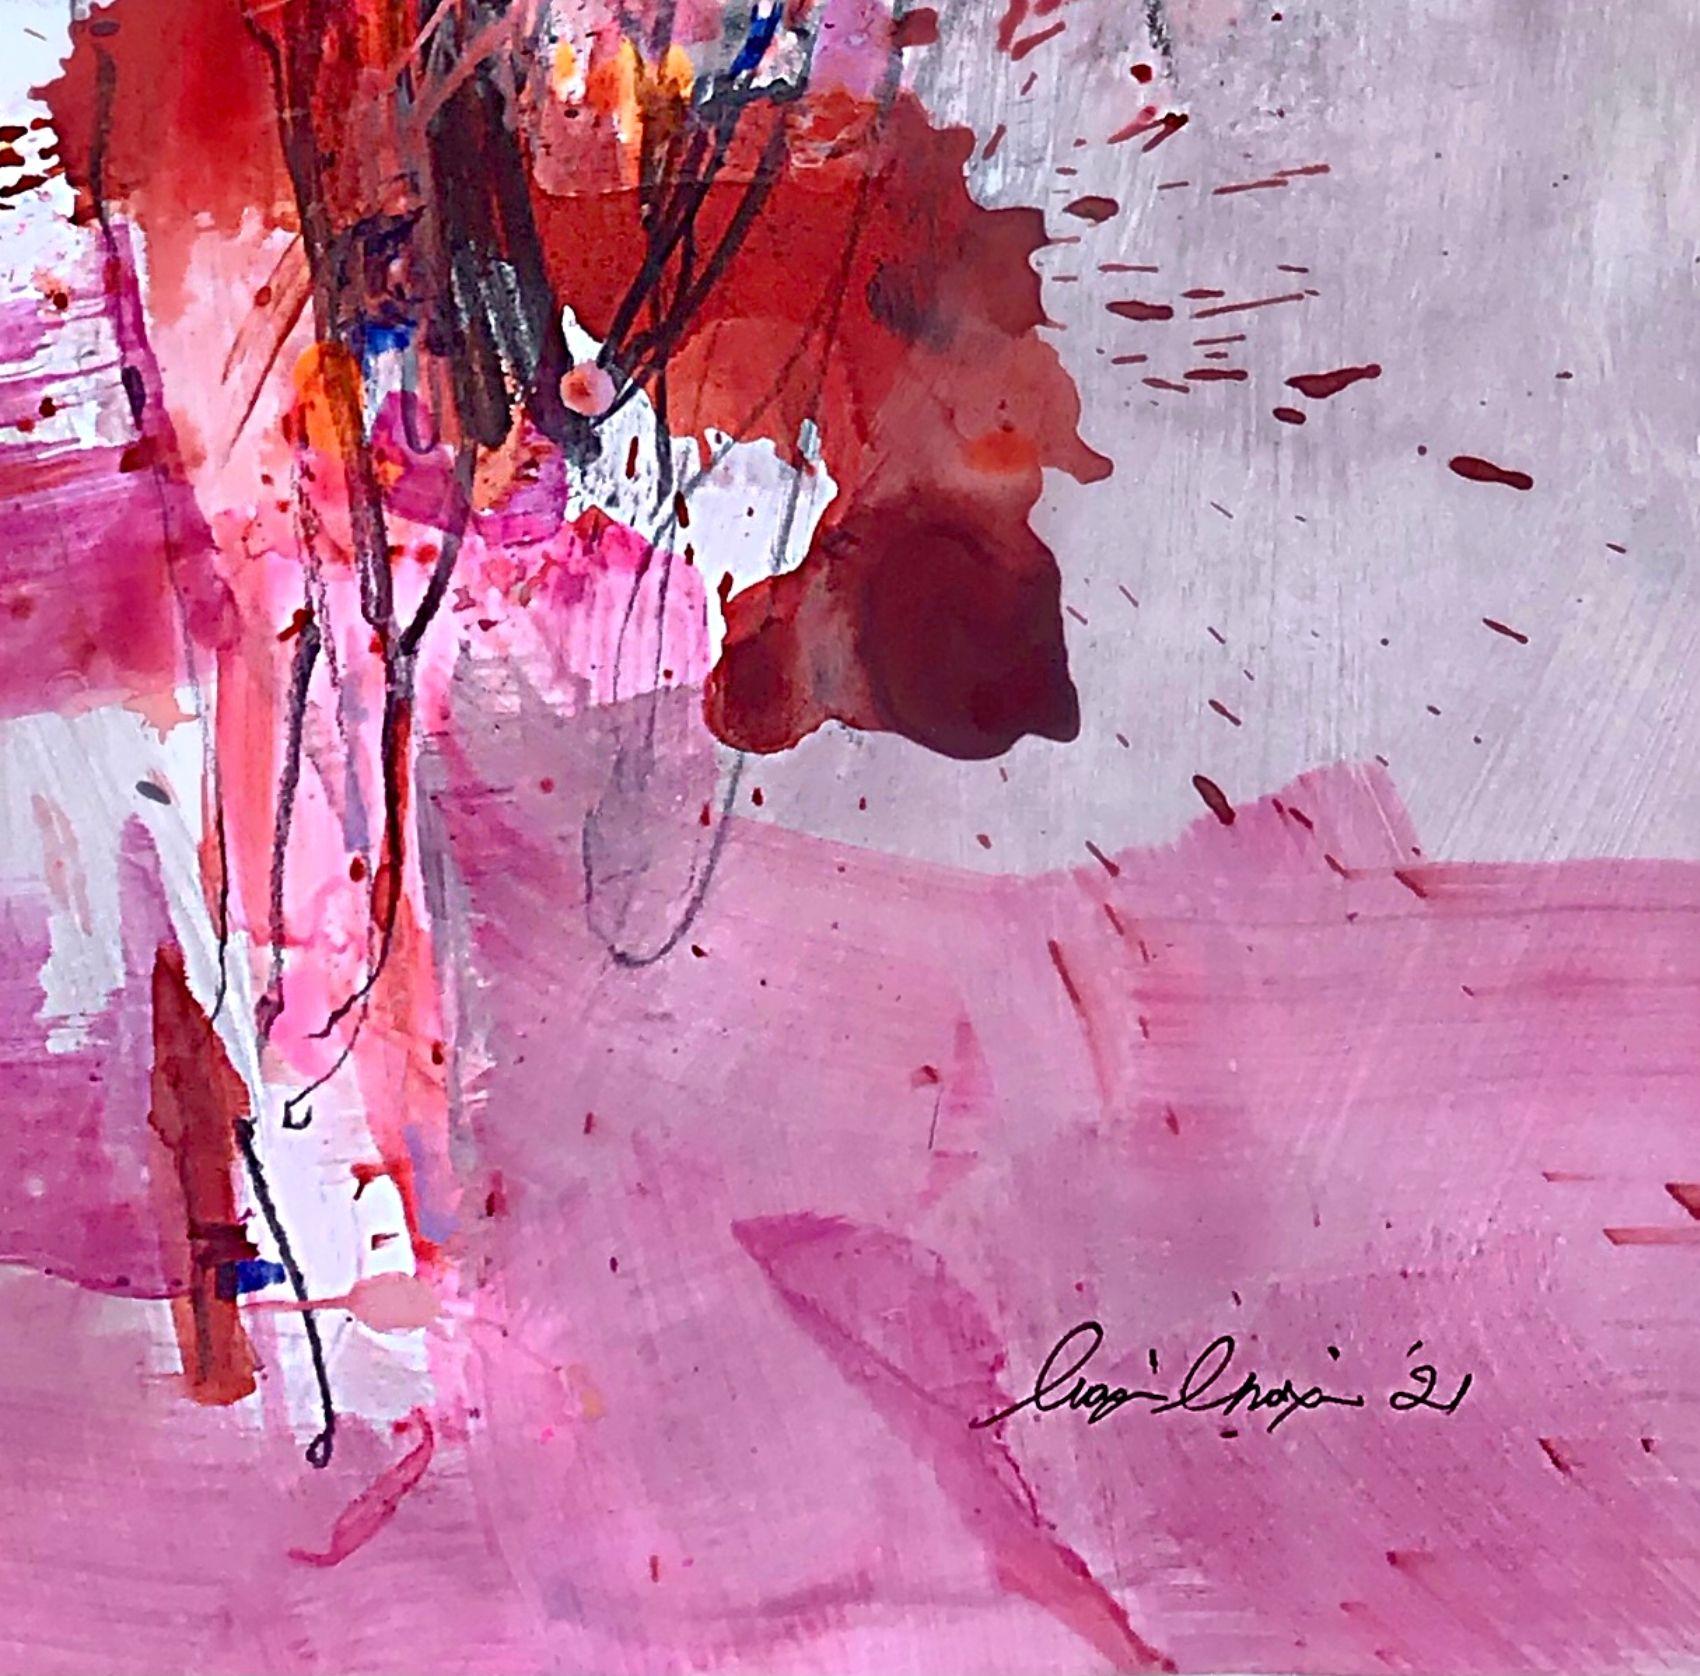 Fleeting Time II, Mixed Media on Paper - Abstract Expressionist Mixed Media Art by Maria Bacha